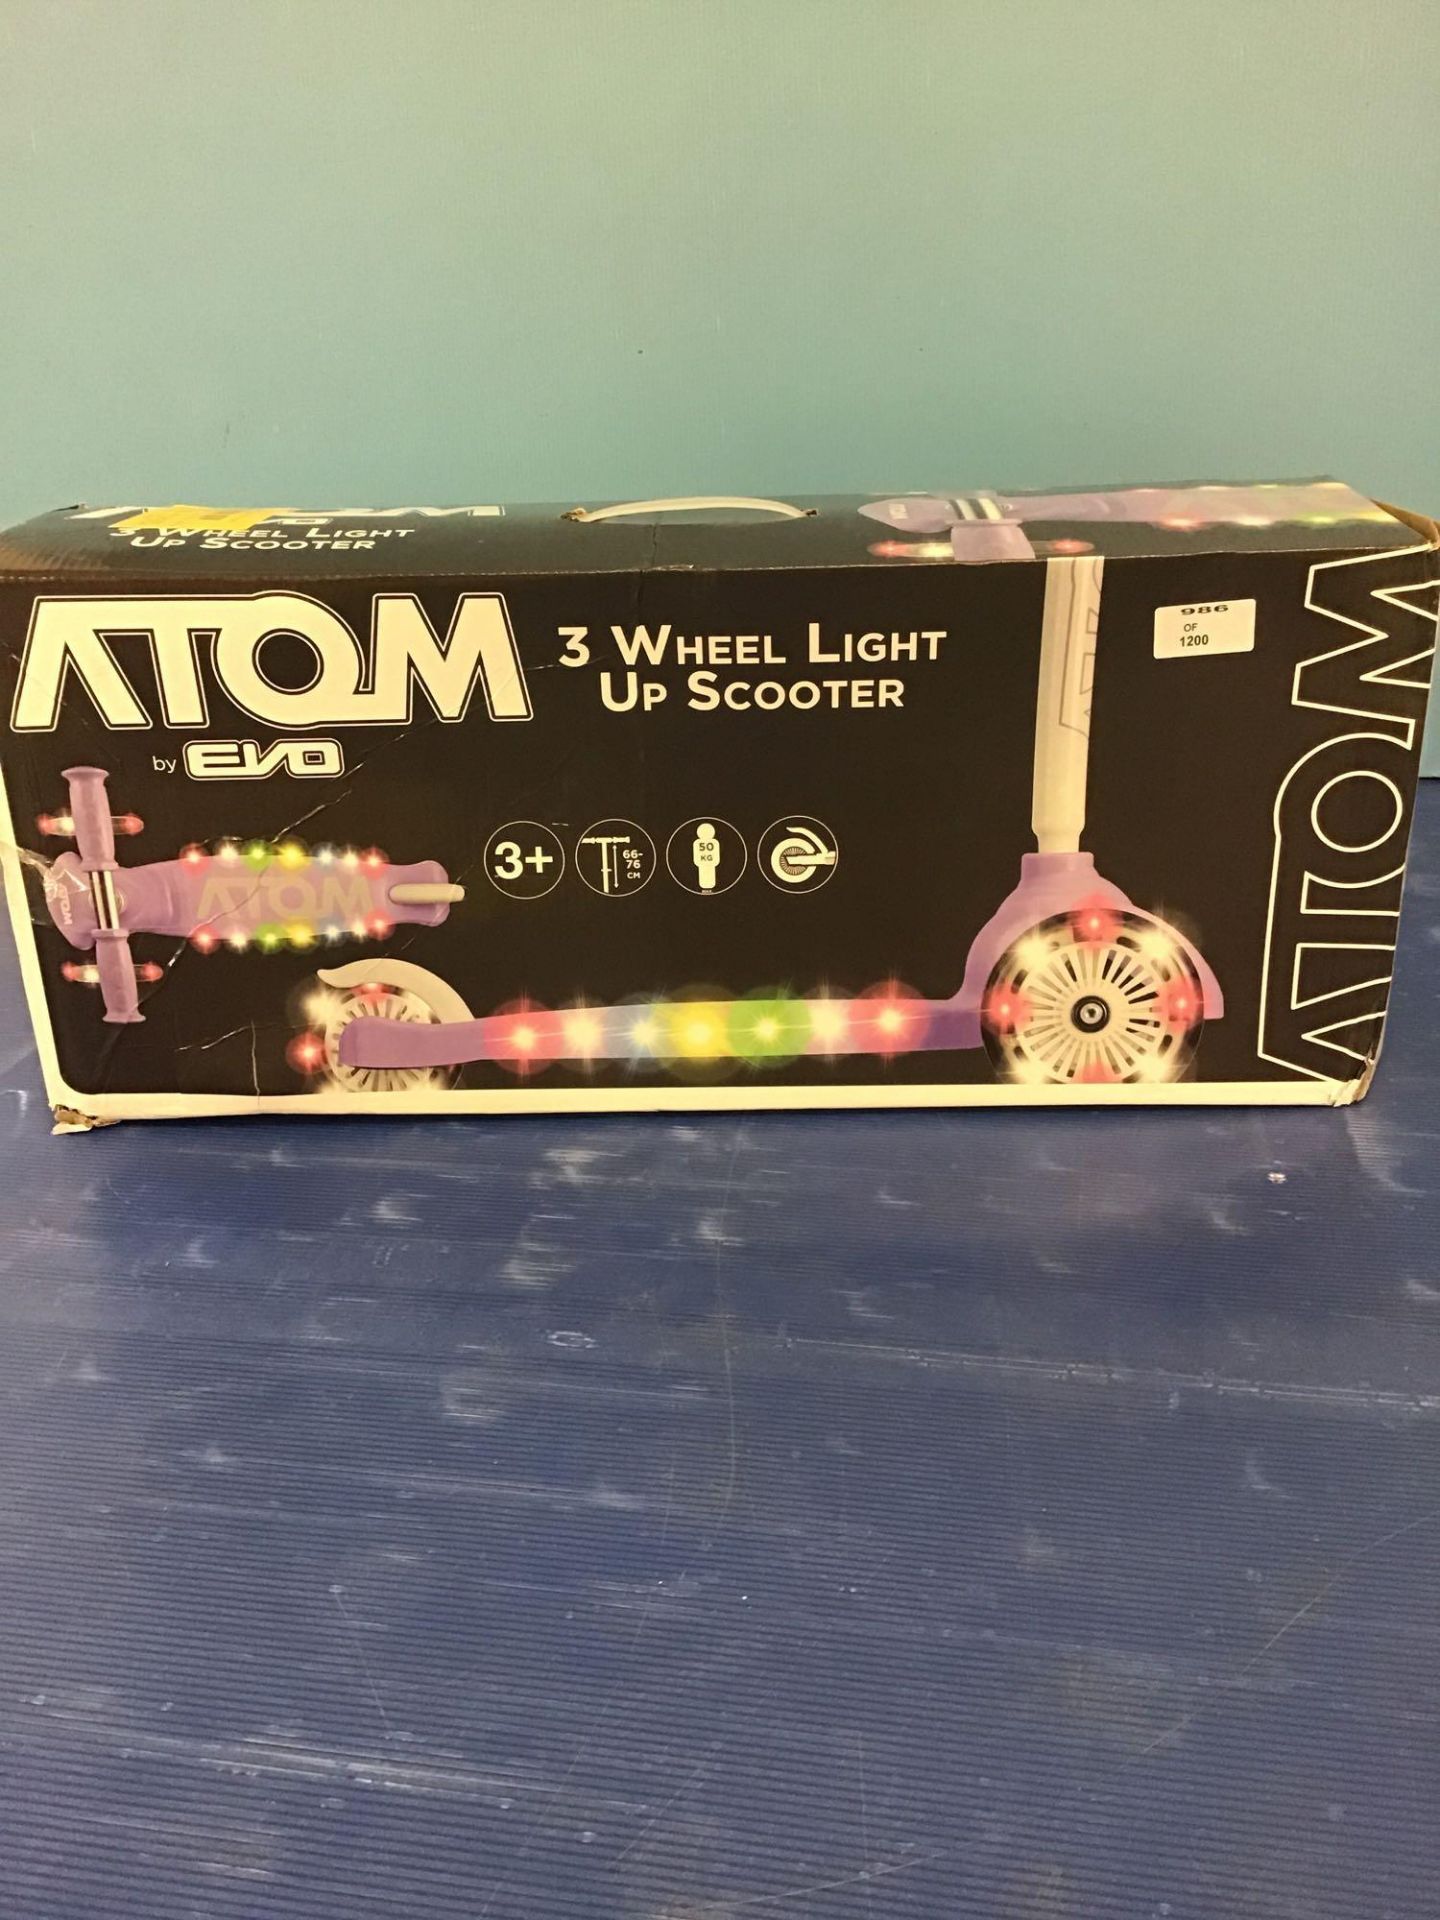 Atom Light Up Tri Scooter, £24.99 RRP - Image 2 of 5